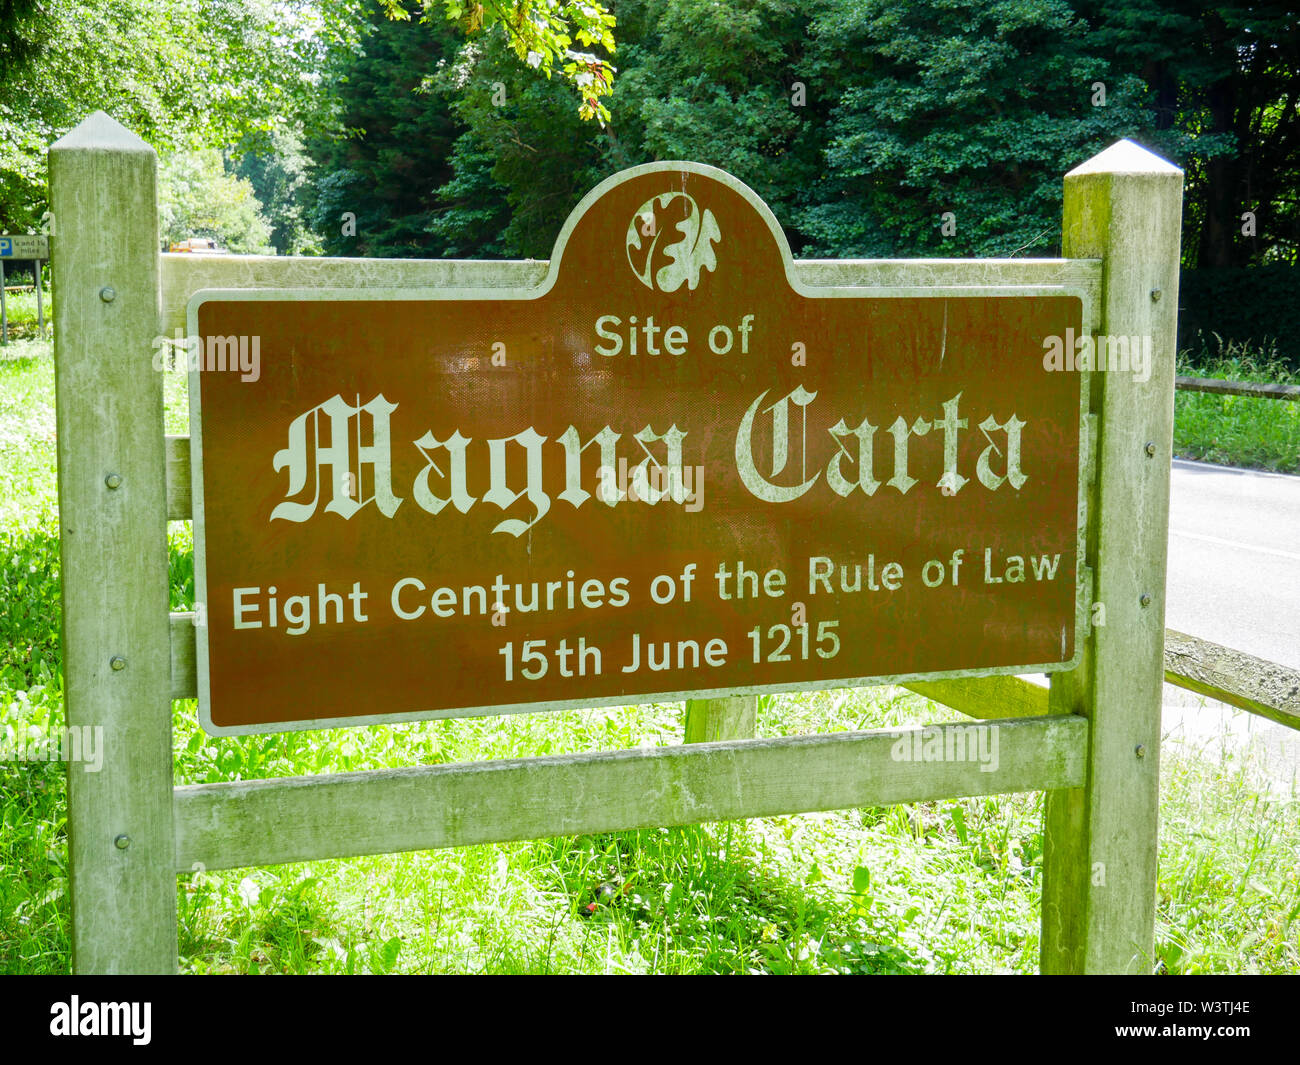 Site of Magna Carta Sign, Rule of Law, Runnymede, Surrey, England, UK, GB. Stock Photo